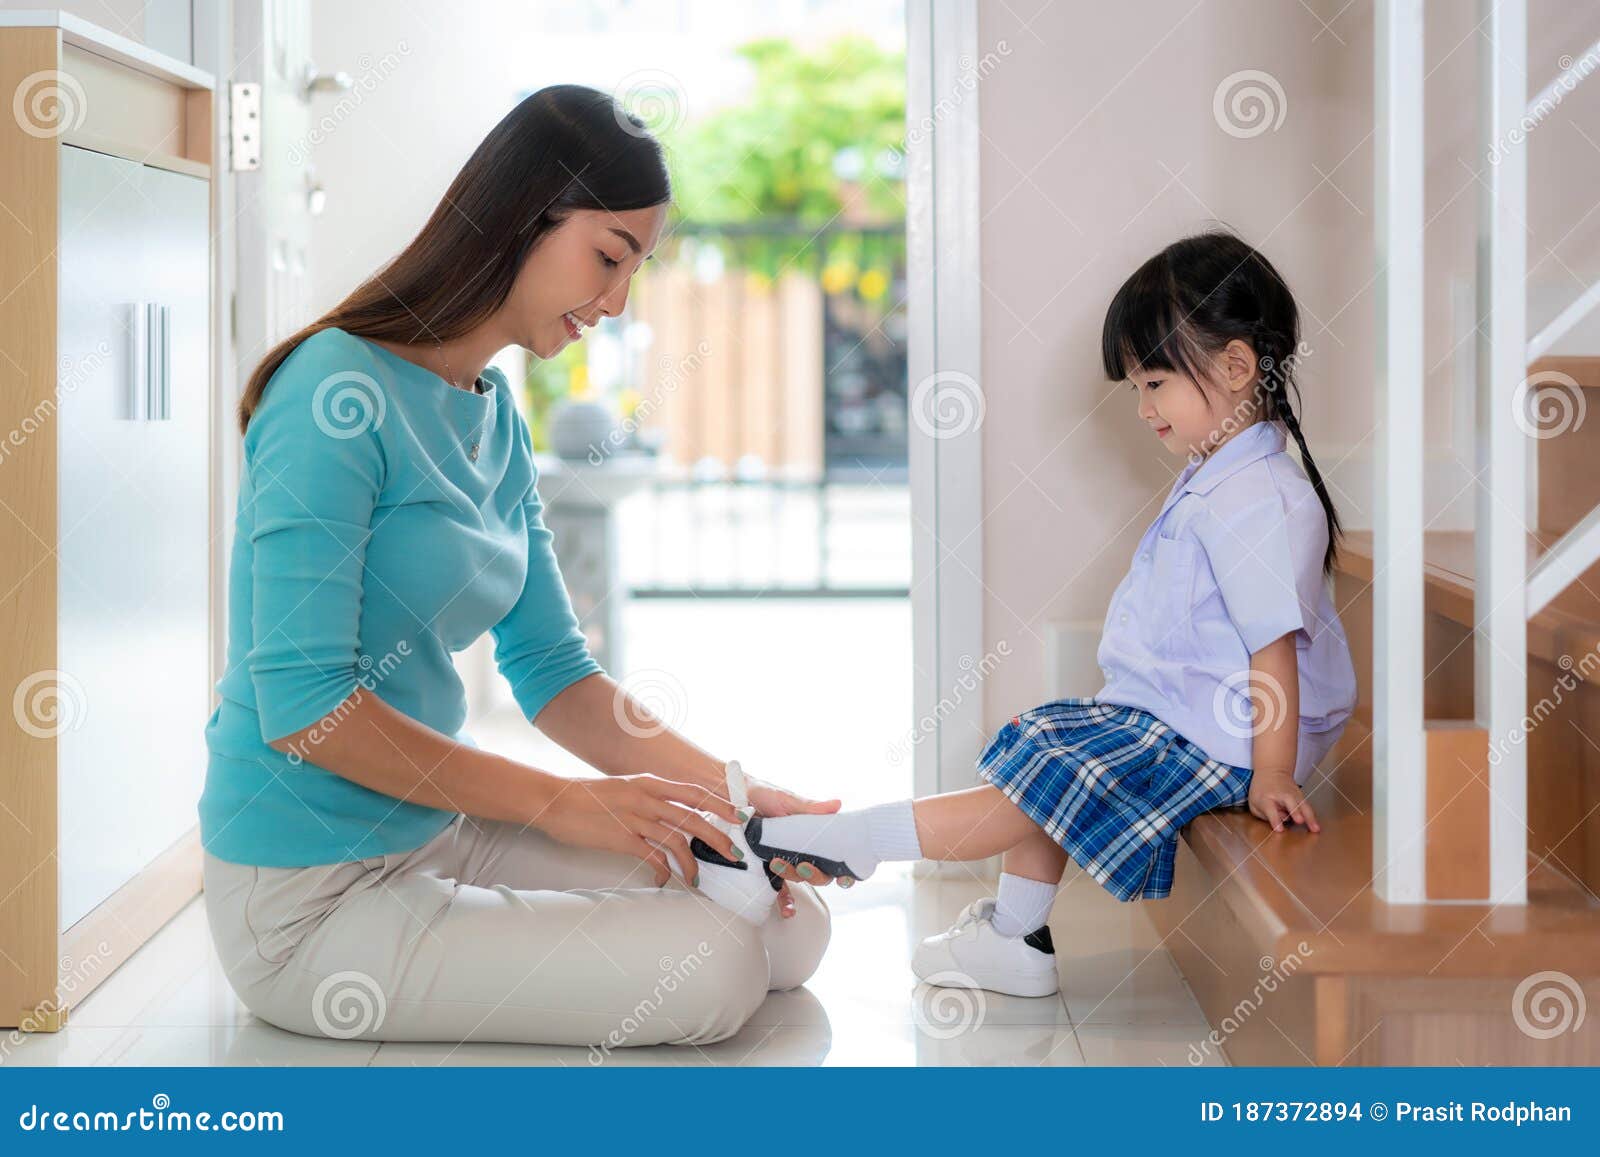 Asian Mother Helping Her Daughter Put Shoes on or Take Off at Home Getting  Ready To Go Out Together or Coming Back Home from Stock Photo - Image of  parenting, lifestyle: 187372894